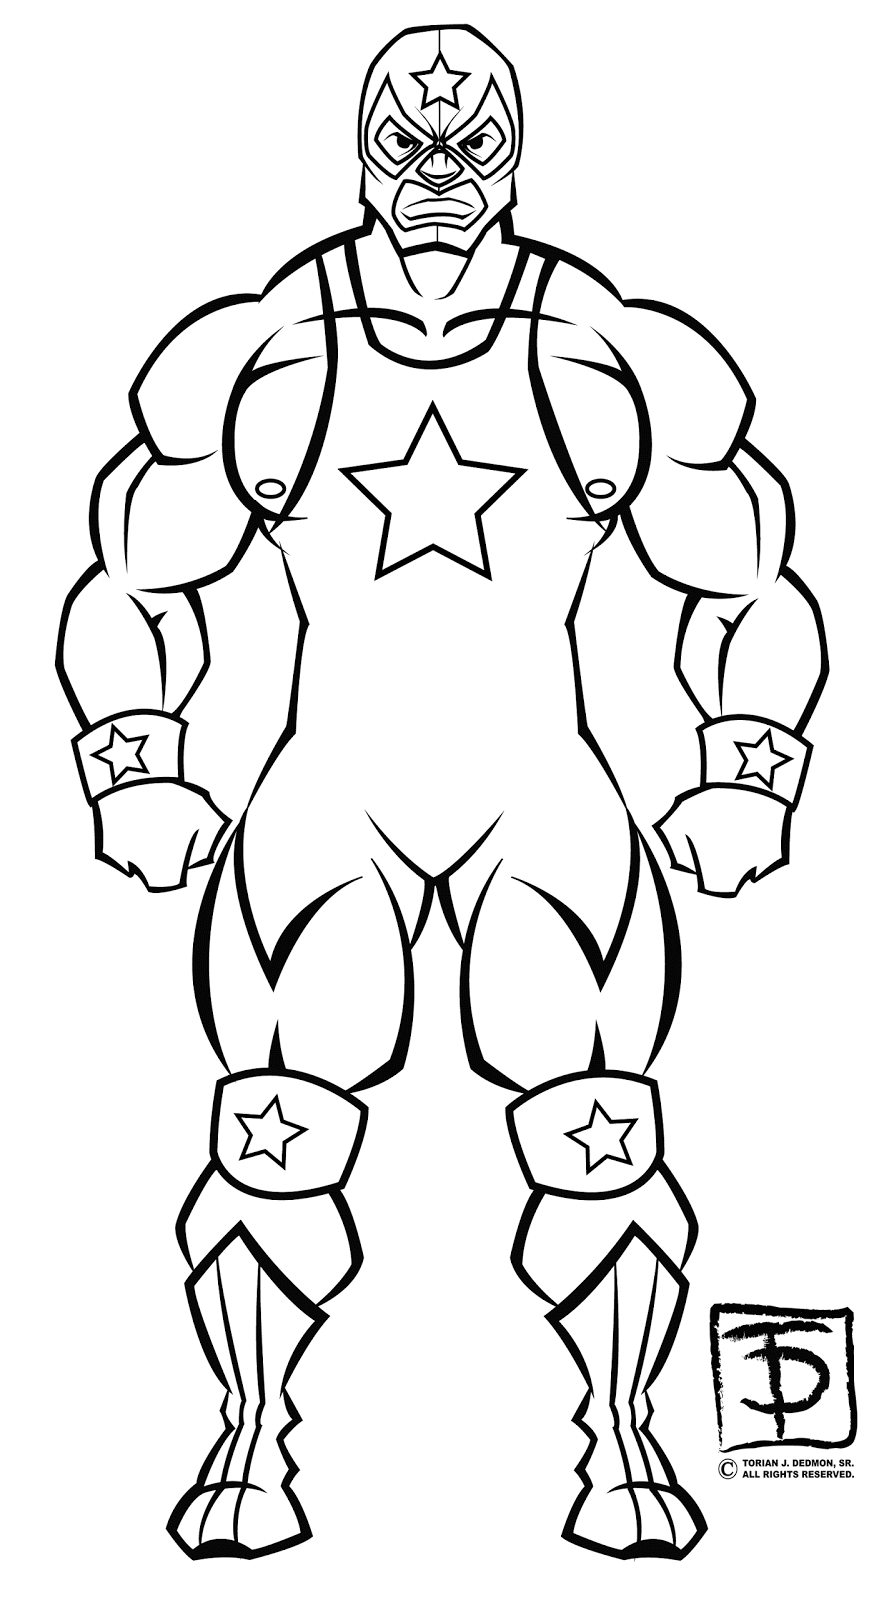 wwe superstars coloring pages 19 best wrestling wwe coloring pages for kids updated 2018 superstars pages coloring wwe 